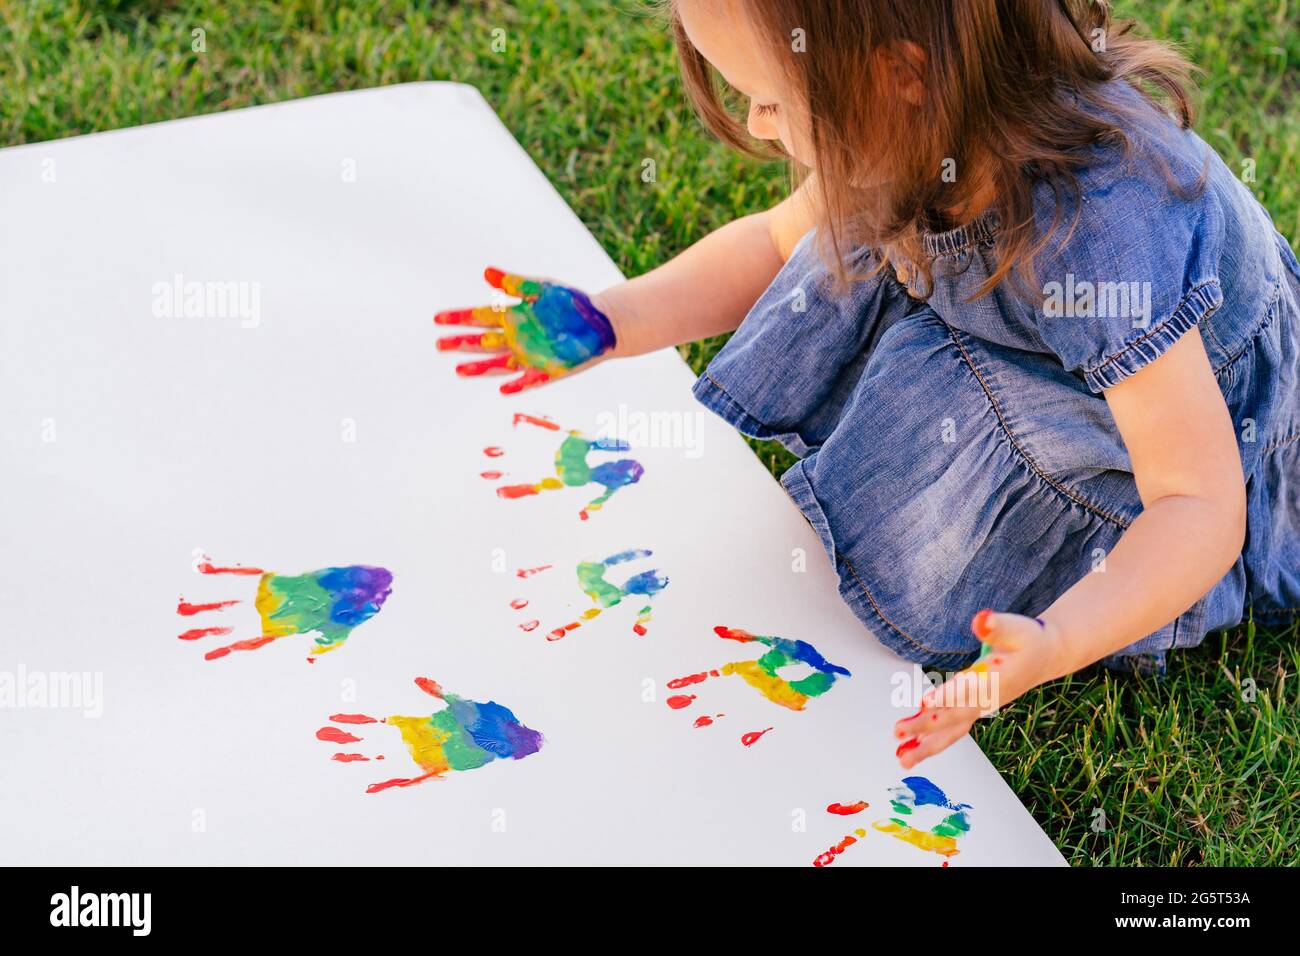 Kids painting together on a large piece of paper Stock Photo - Alamy